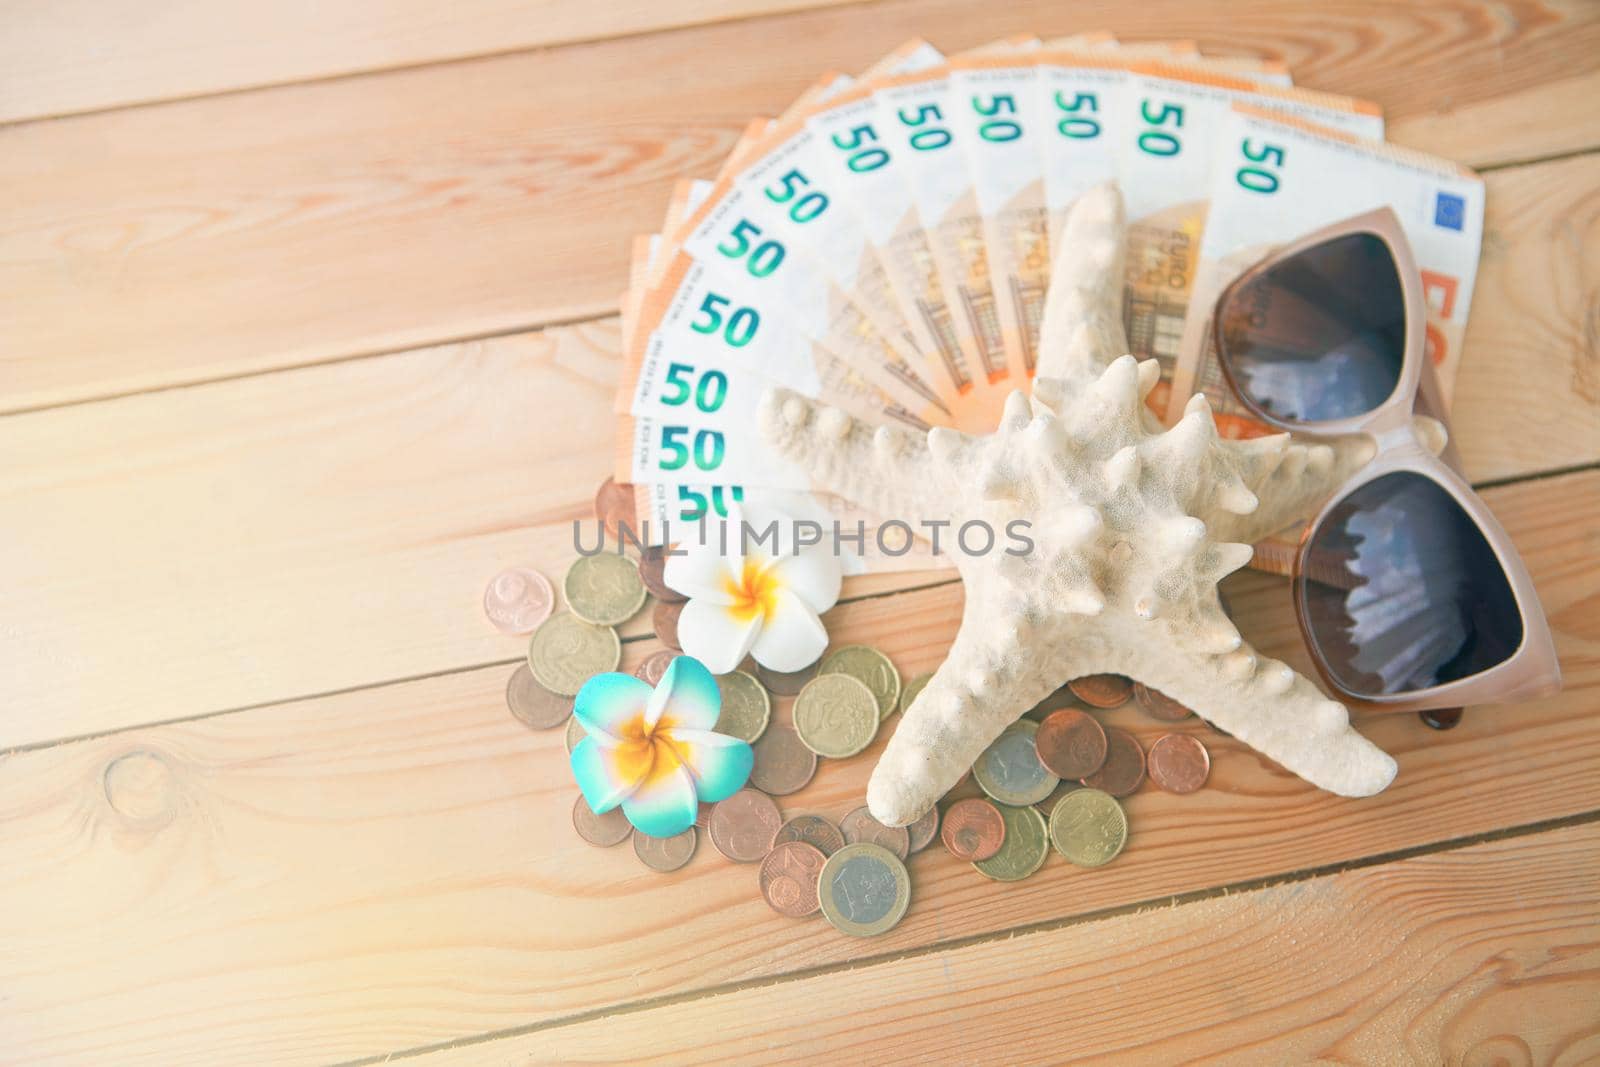 Seastar with sunglases on lot european money banknotes. Euro money and flowers on wooden backgrop as summer vacation and travel concept